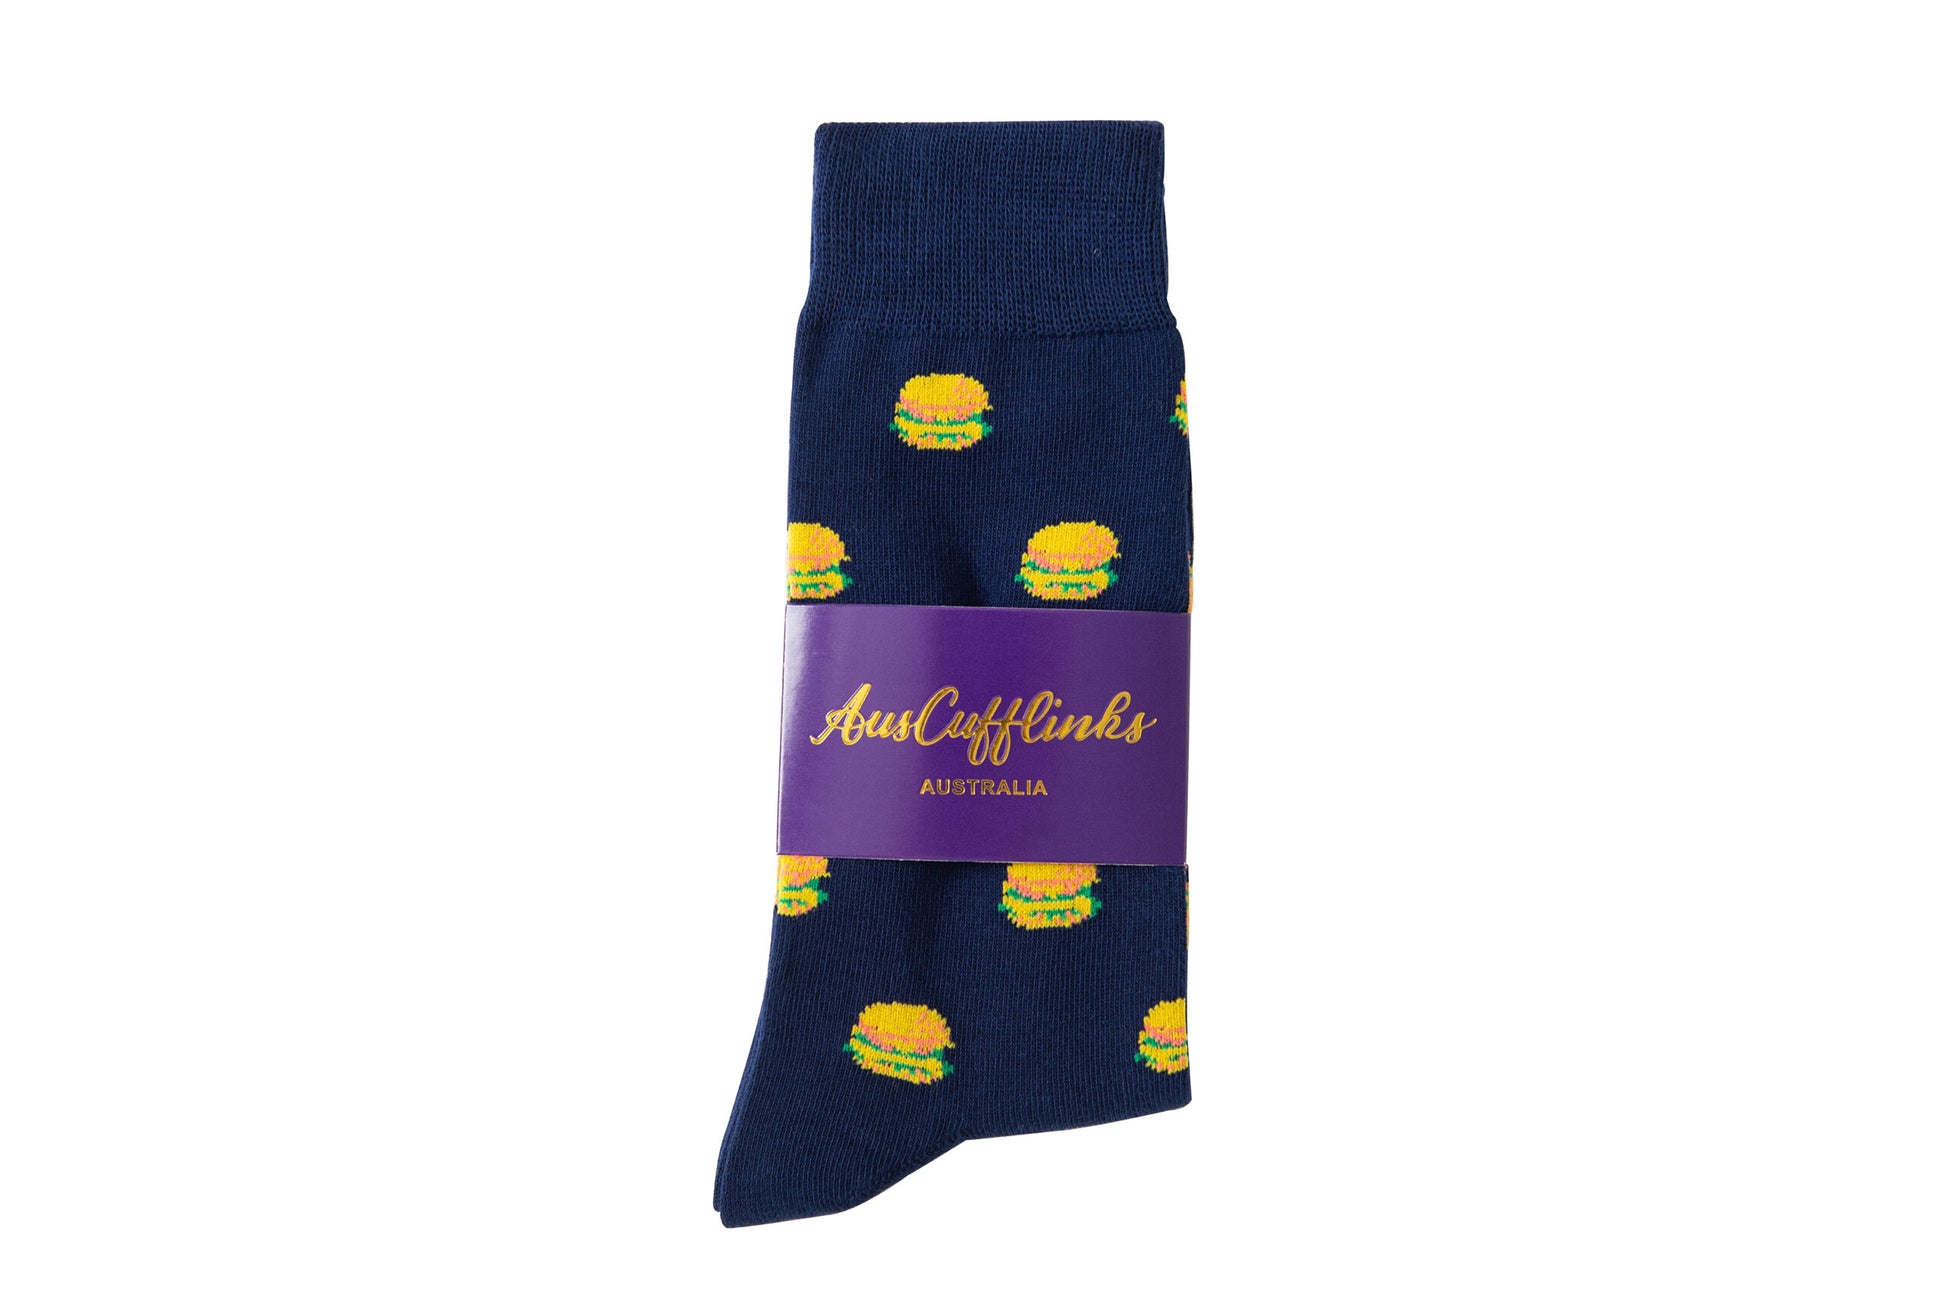 A blue Burger Sock with a purple label.